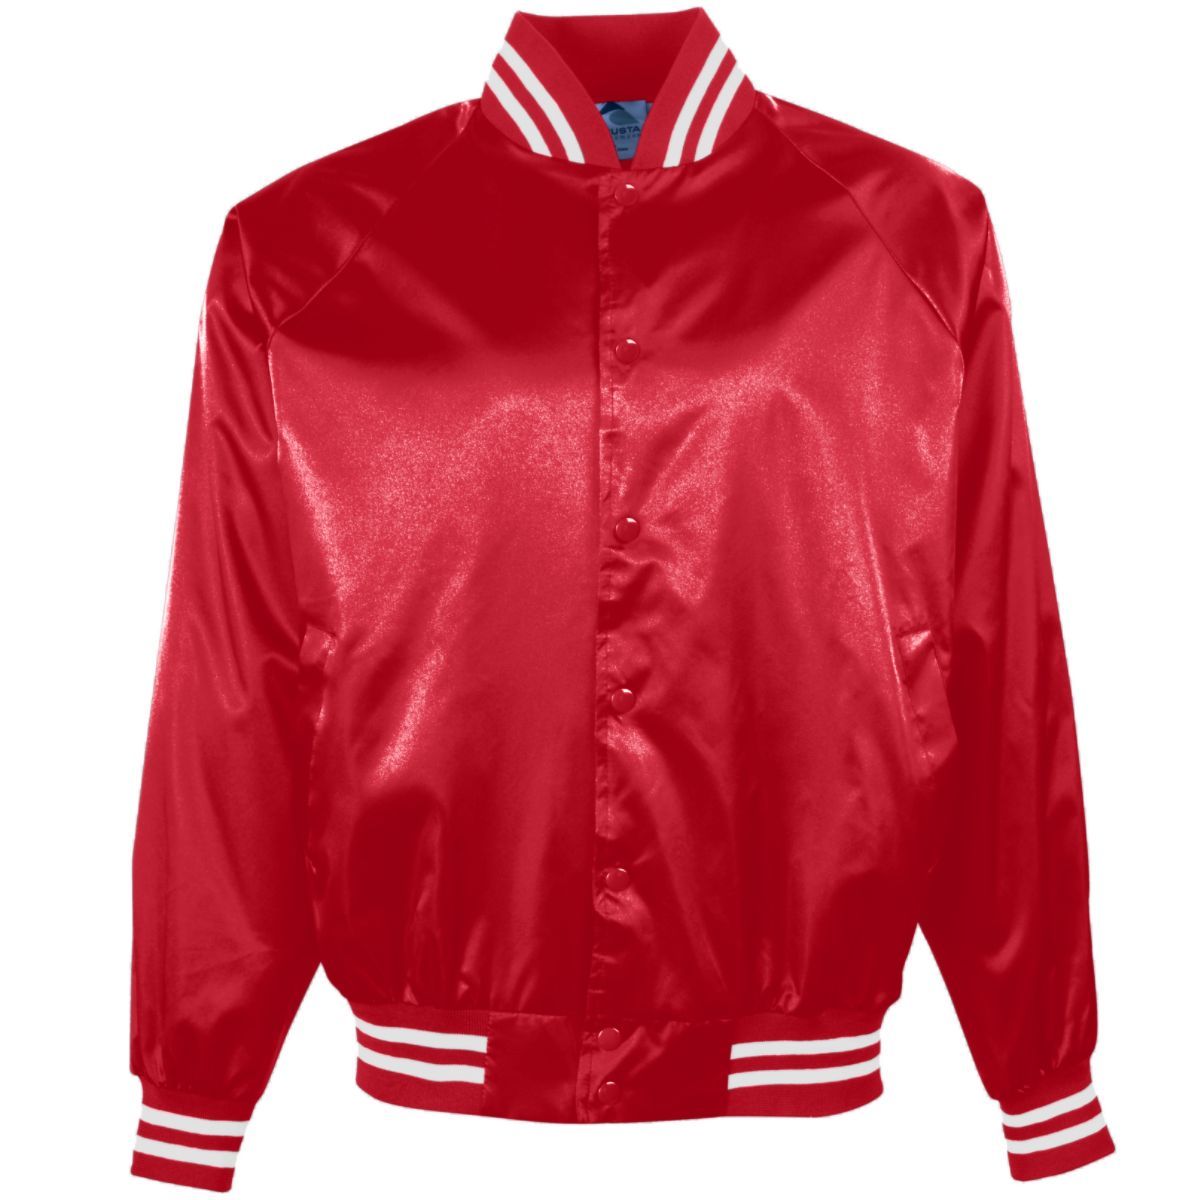 Augusta Sportswear Satin Baseball Jacket/Striped Trim in Red/White  -Part of the Adult, Adult-Jacket, Augusta-Products, Baseball, Outerwear, All-Sports, All-Sports-1 product lines at KanaleyCreations.com